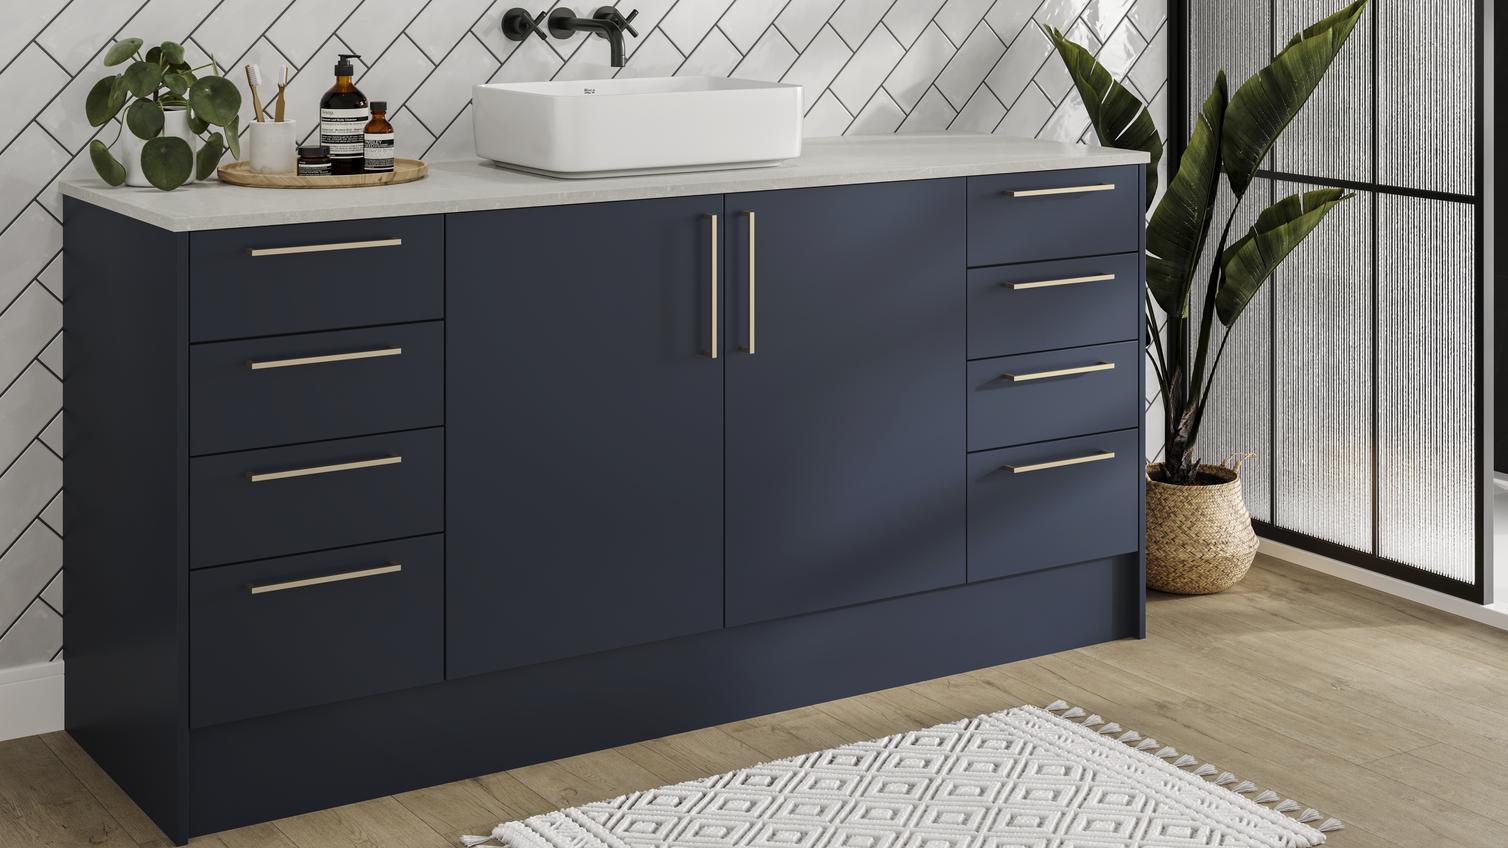 Compact bathroom with navy, slab doors. Contains a large vanity unit, four drawer unit, brass bar handles and open shelving.